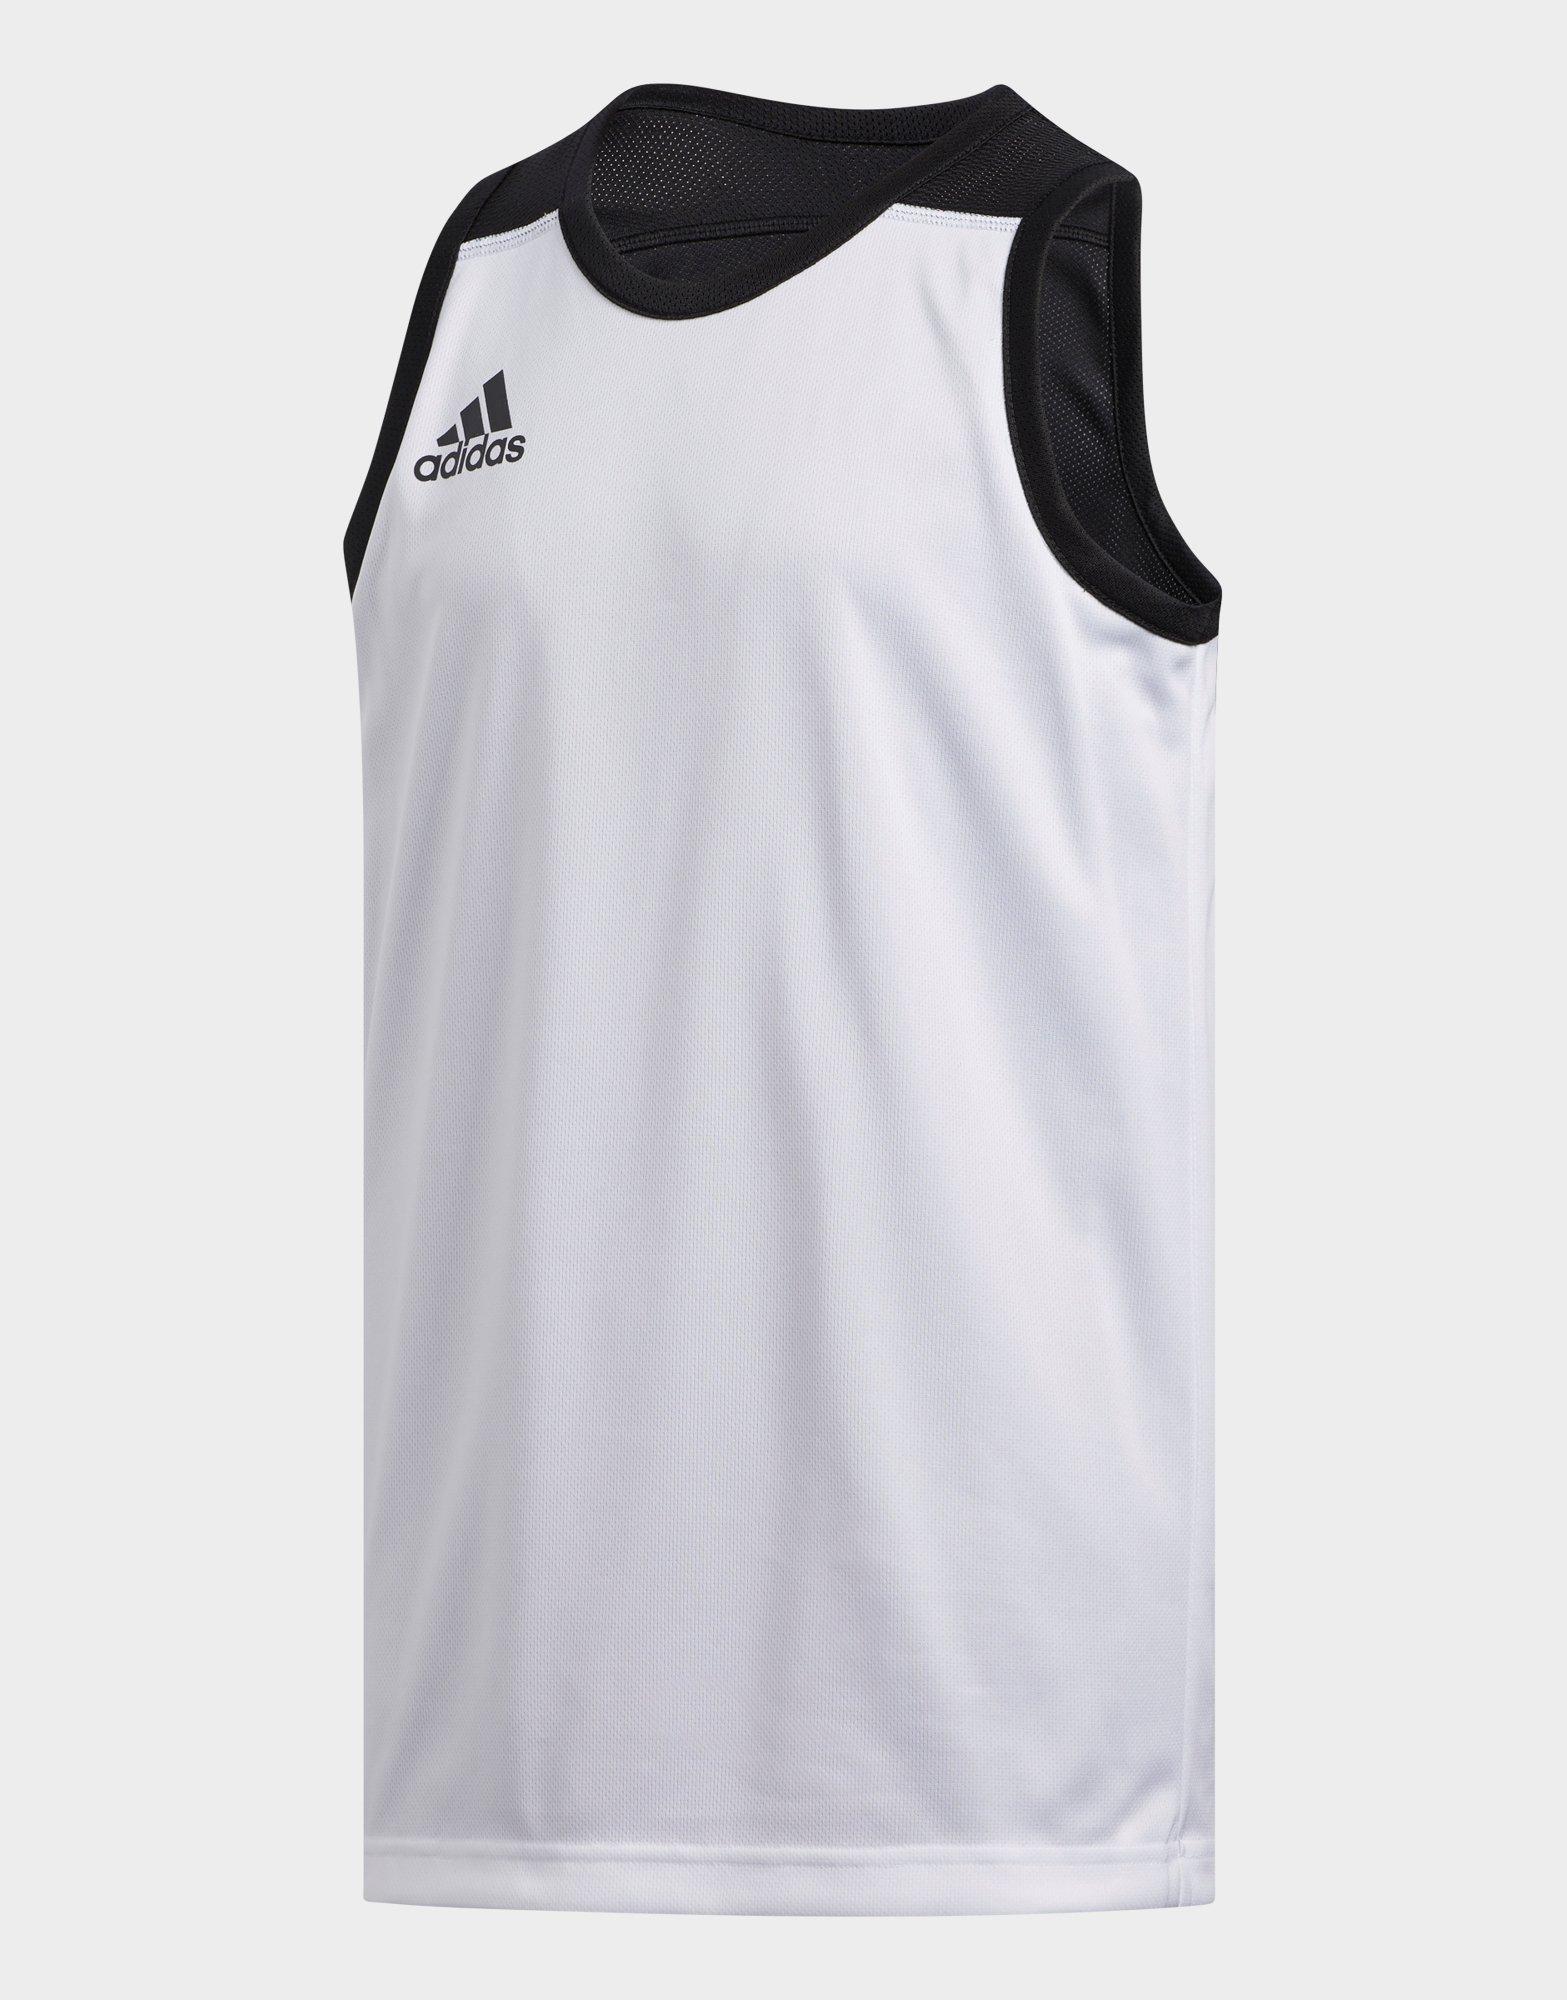 black and white reversible jersey